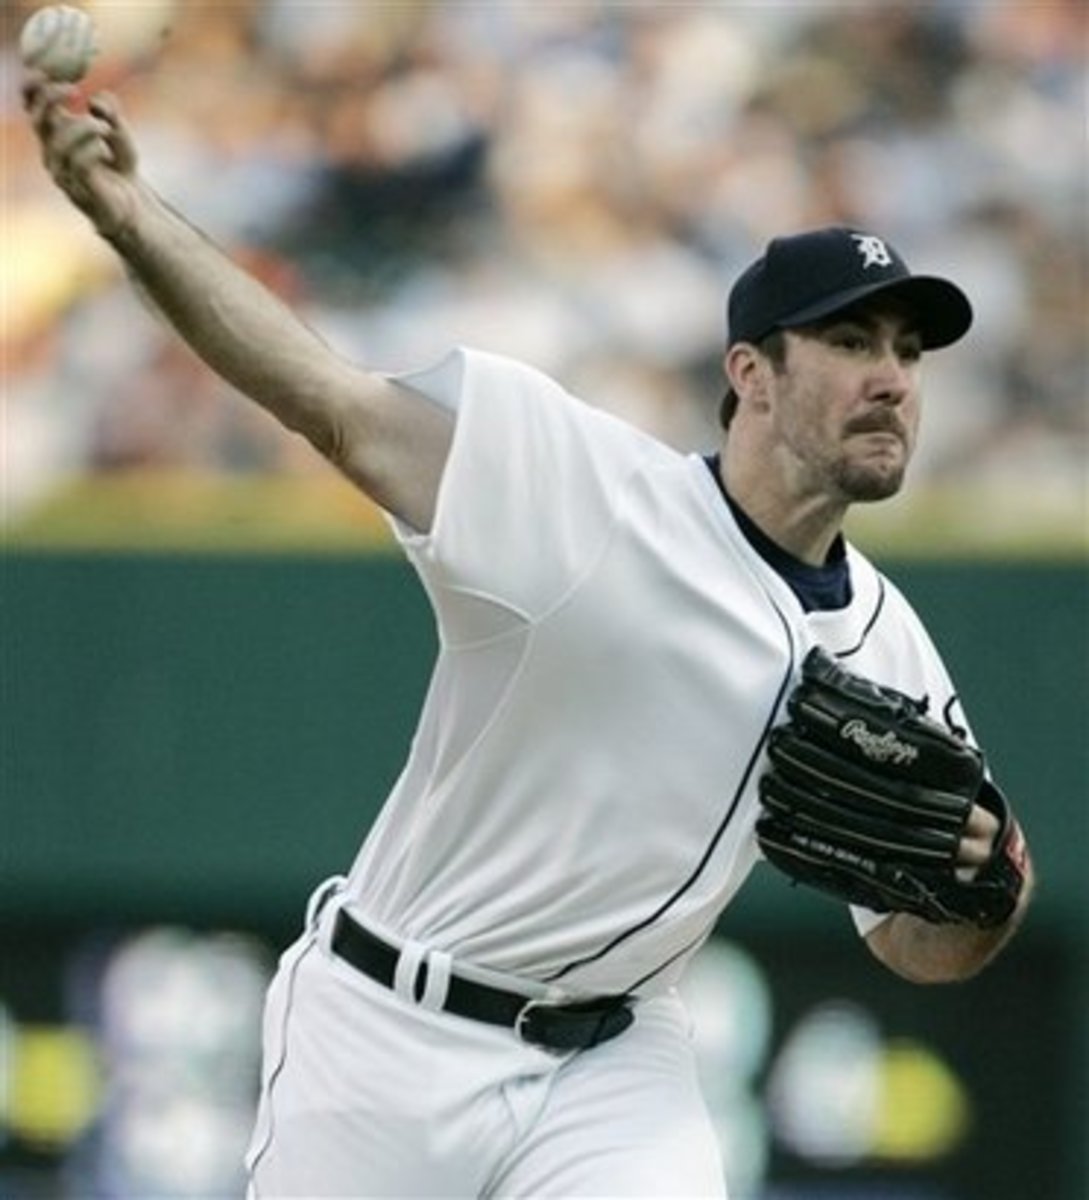 In 2011, Justin Verlander threw his 2nd no-hitter, won AL Cy Young, and AL MVP.